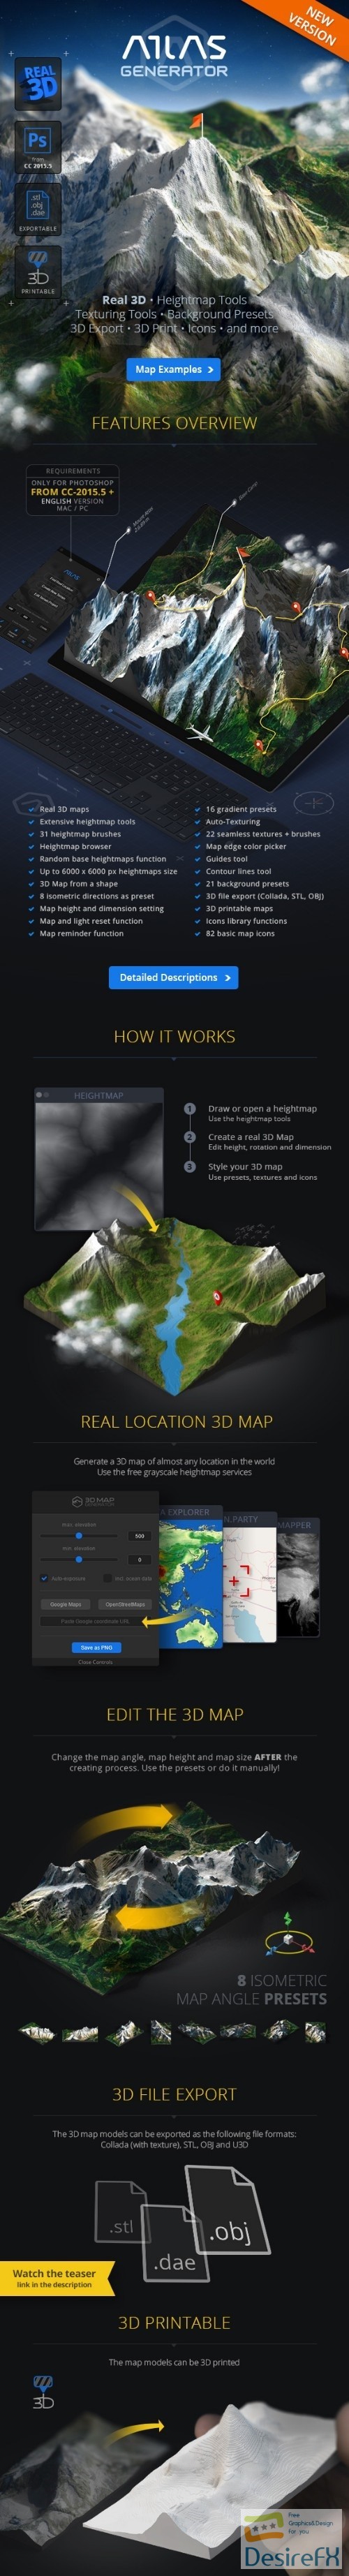 3D Map Generator - Atlas - From Heightmap to real 3D map 22277498